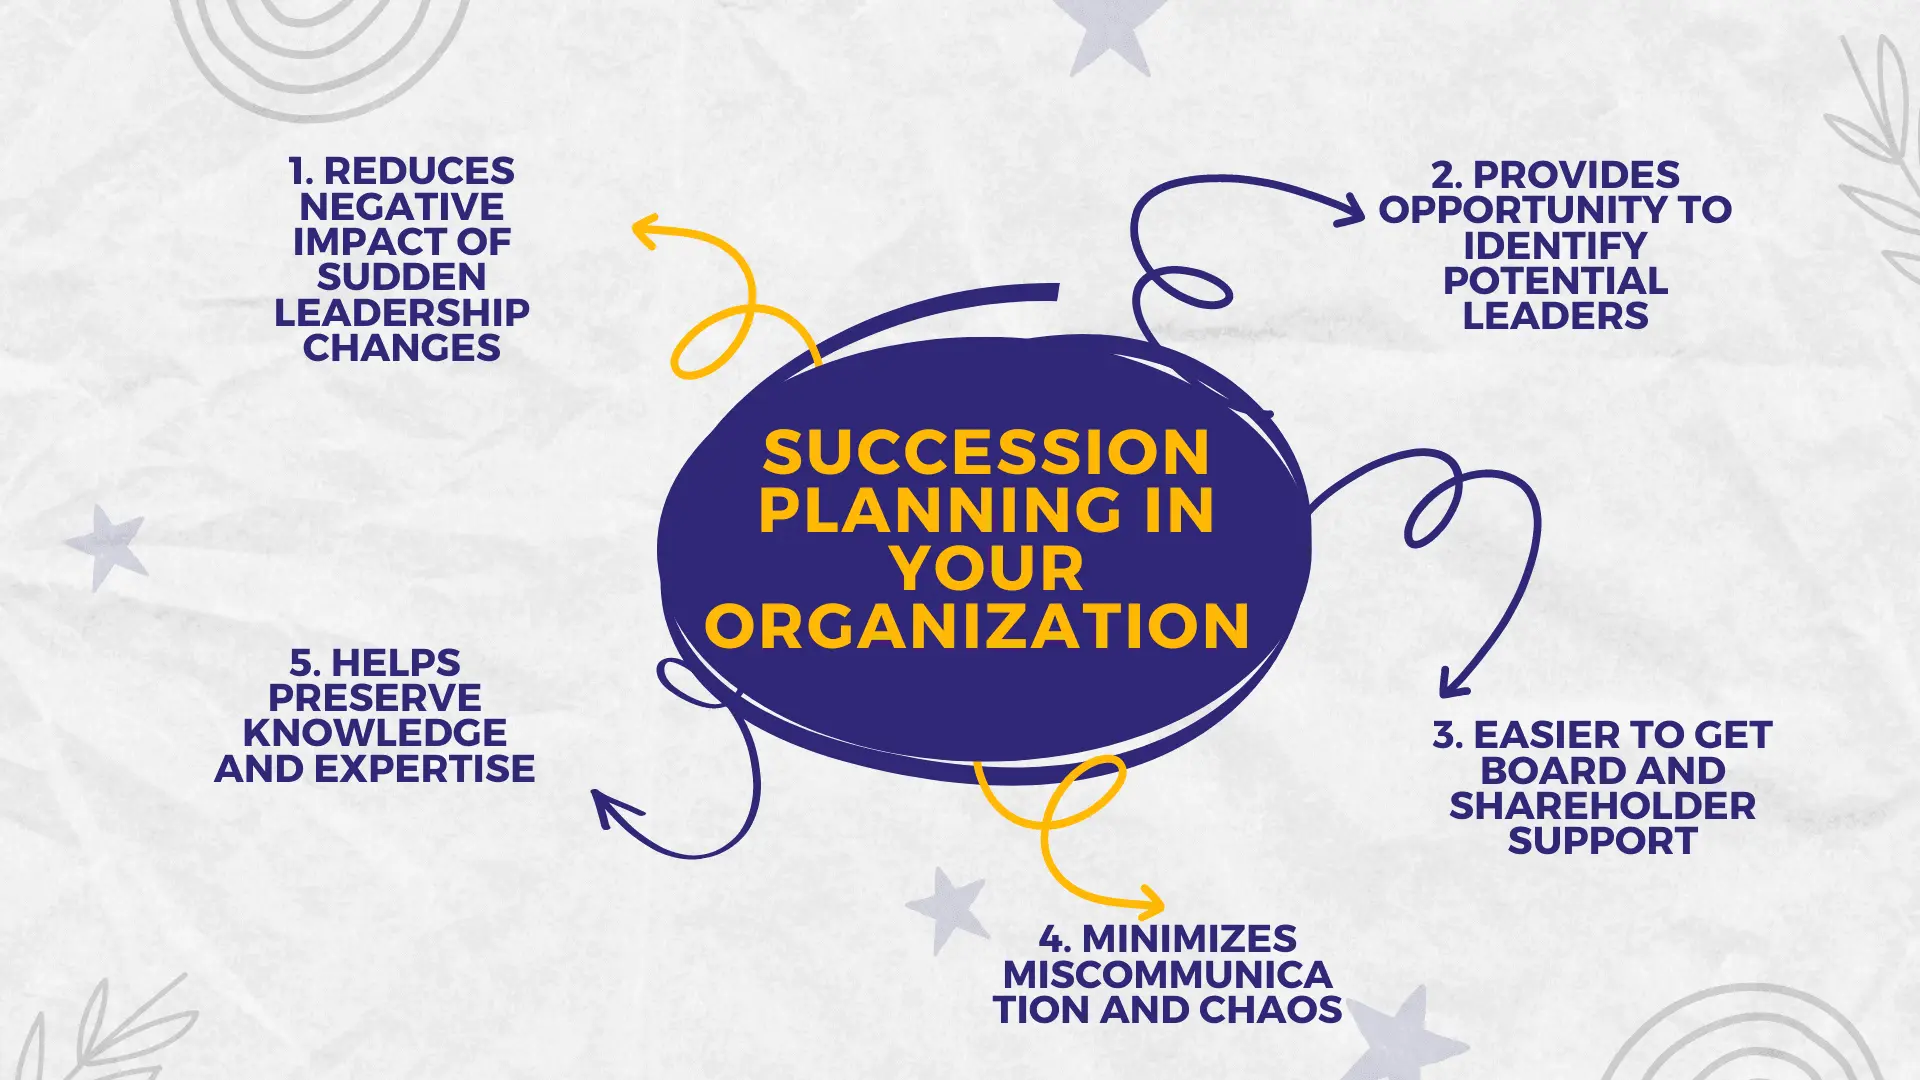 Why you need succession planning in your organization